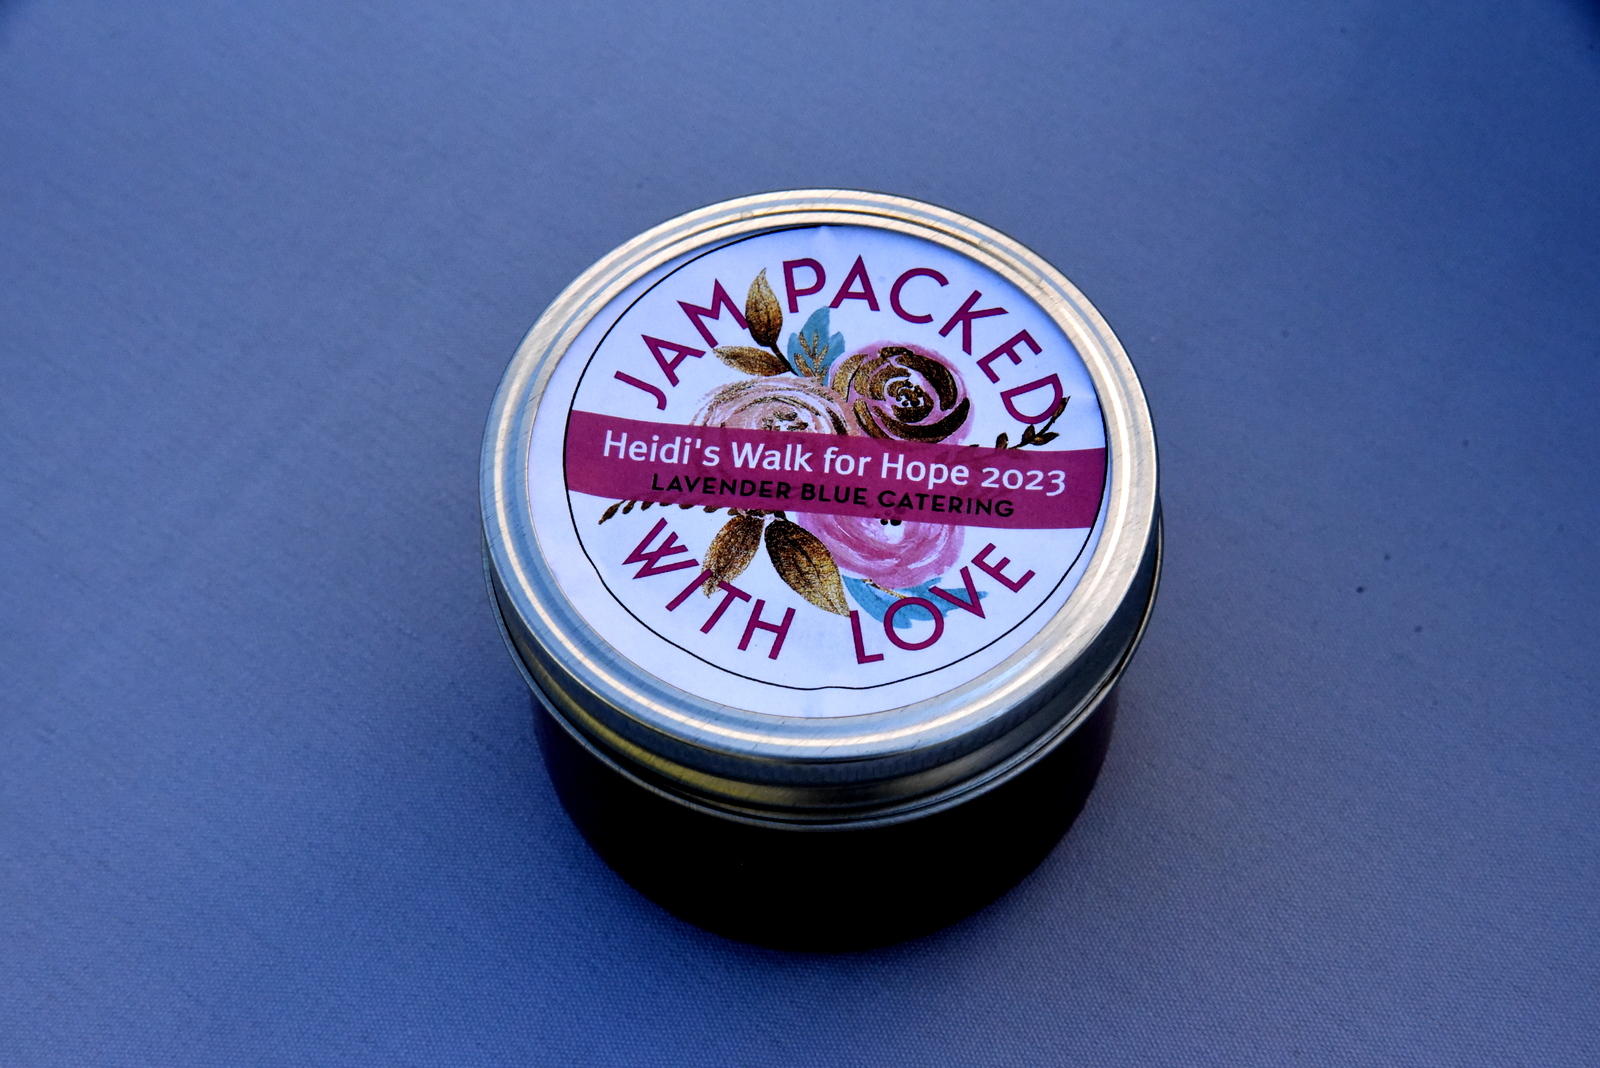 Strawberry Jam made by Lavender Blue Catering in support of Heidi's Walk for Hope September 2023.